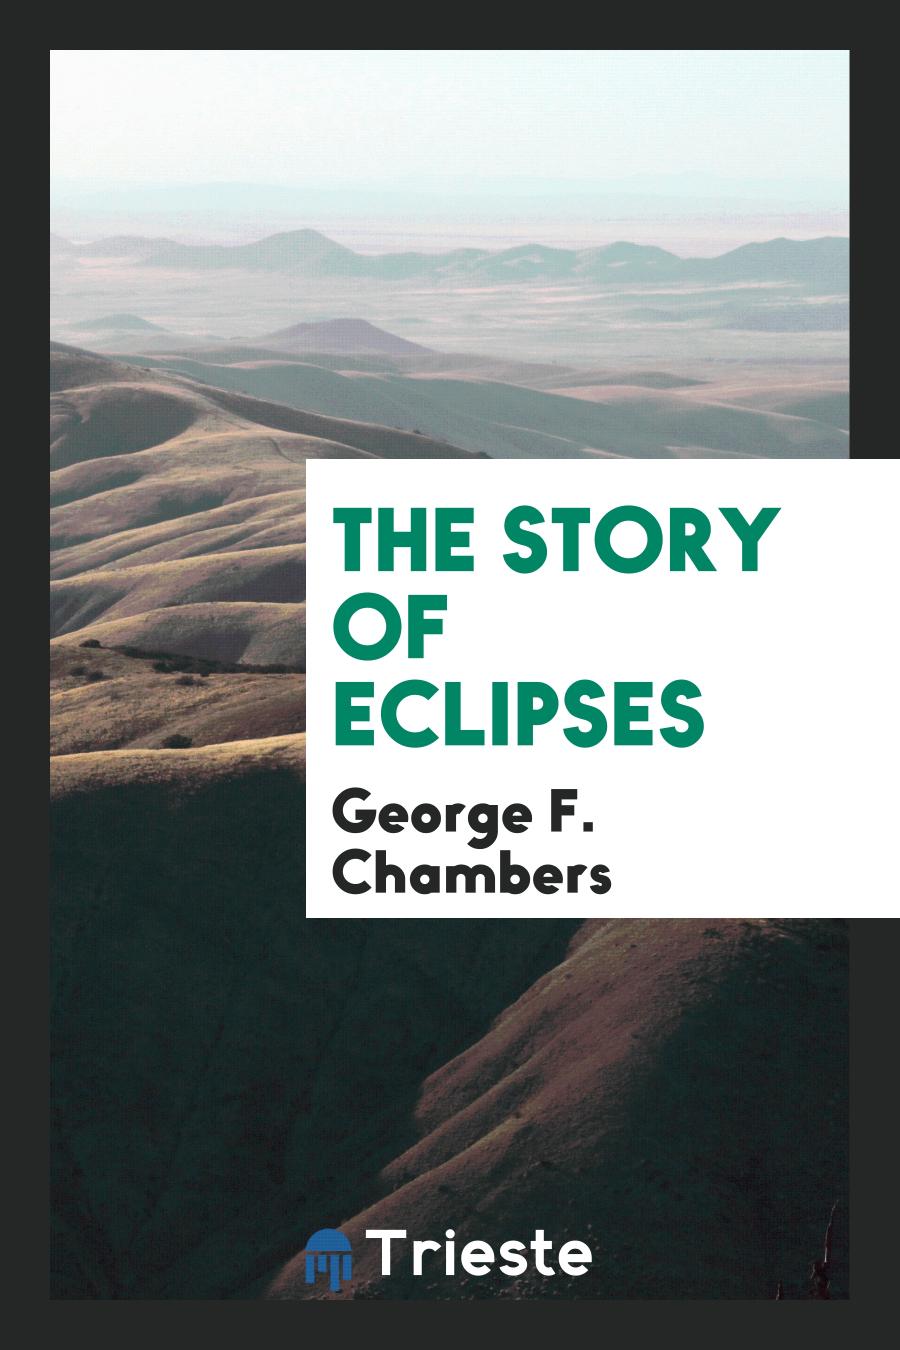 The story of eclipses